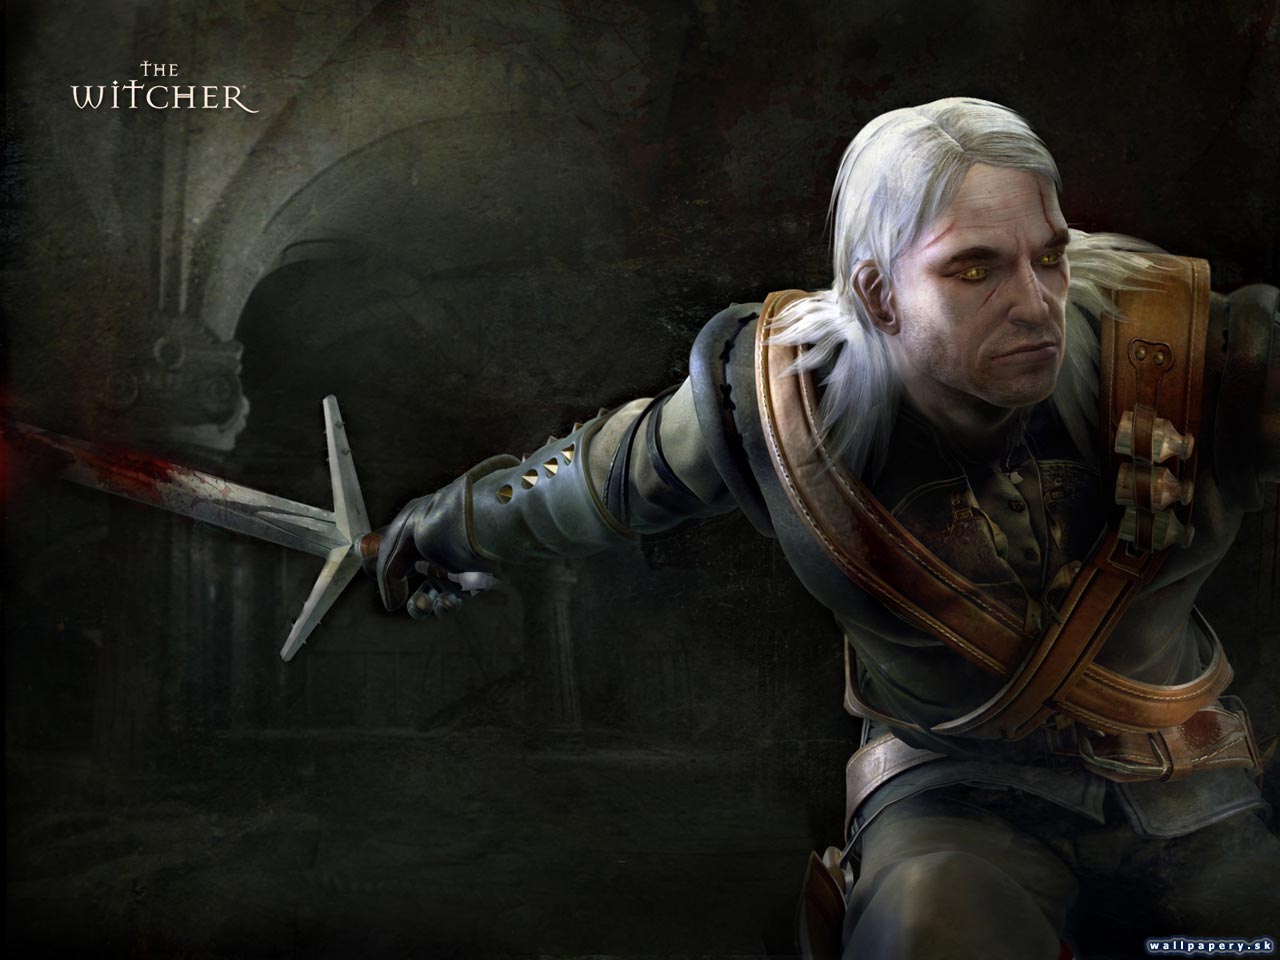 The Witcher - wallpaper 12